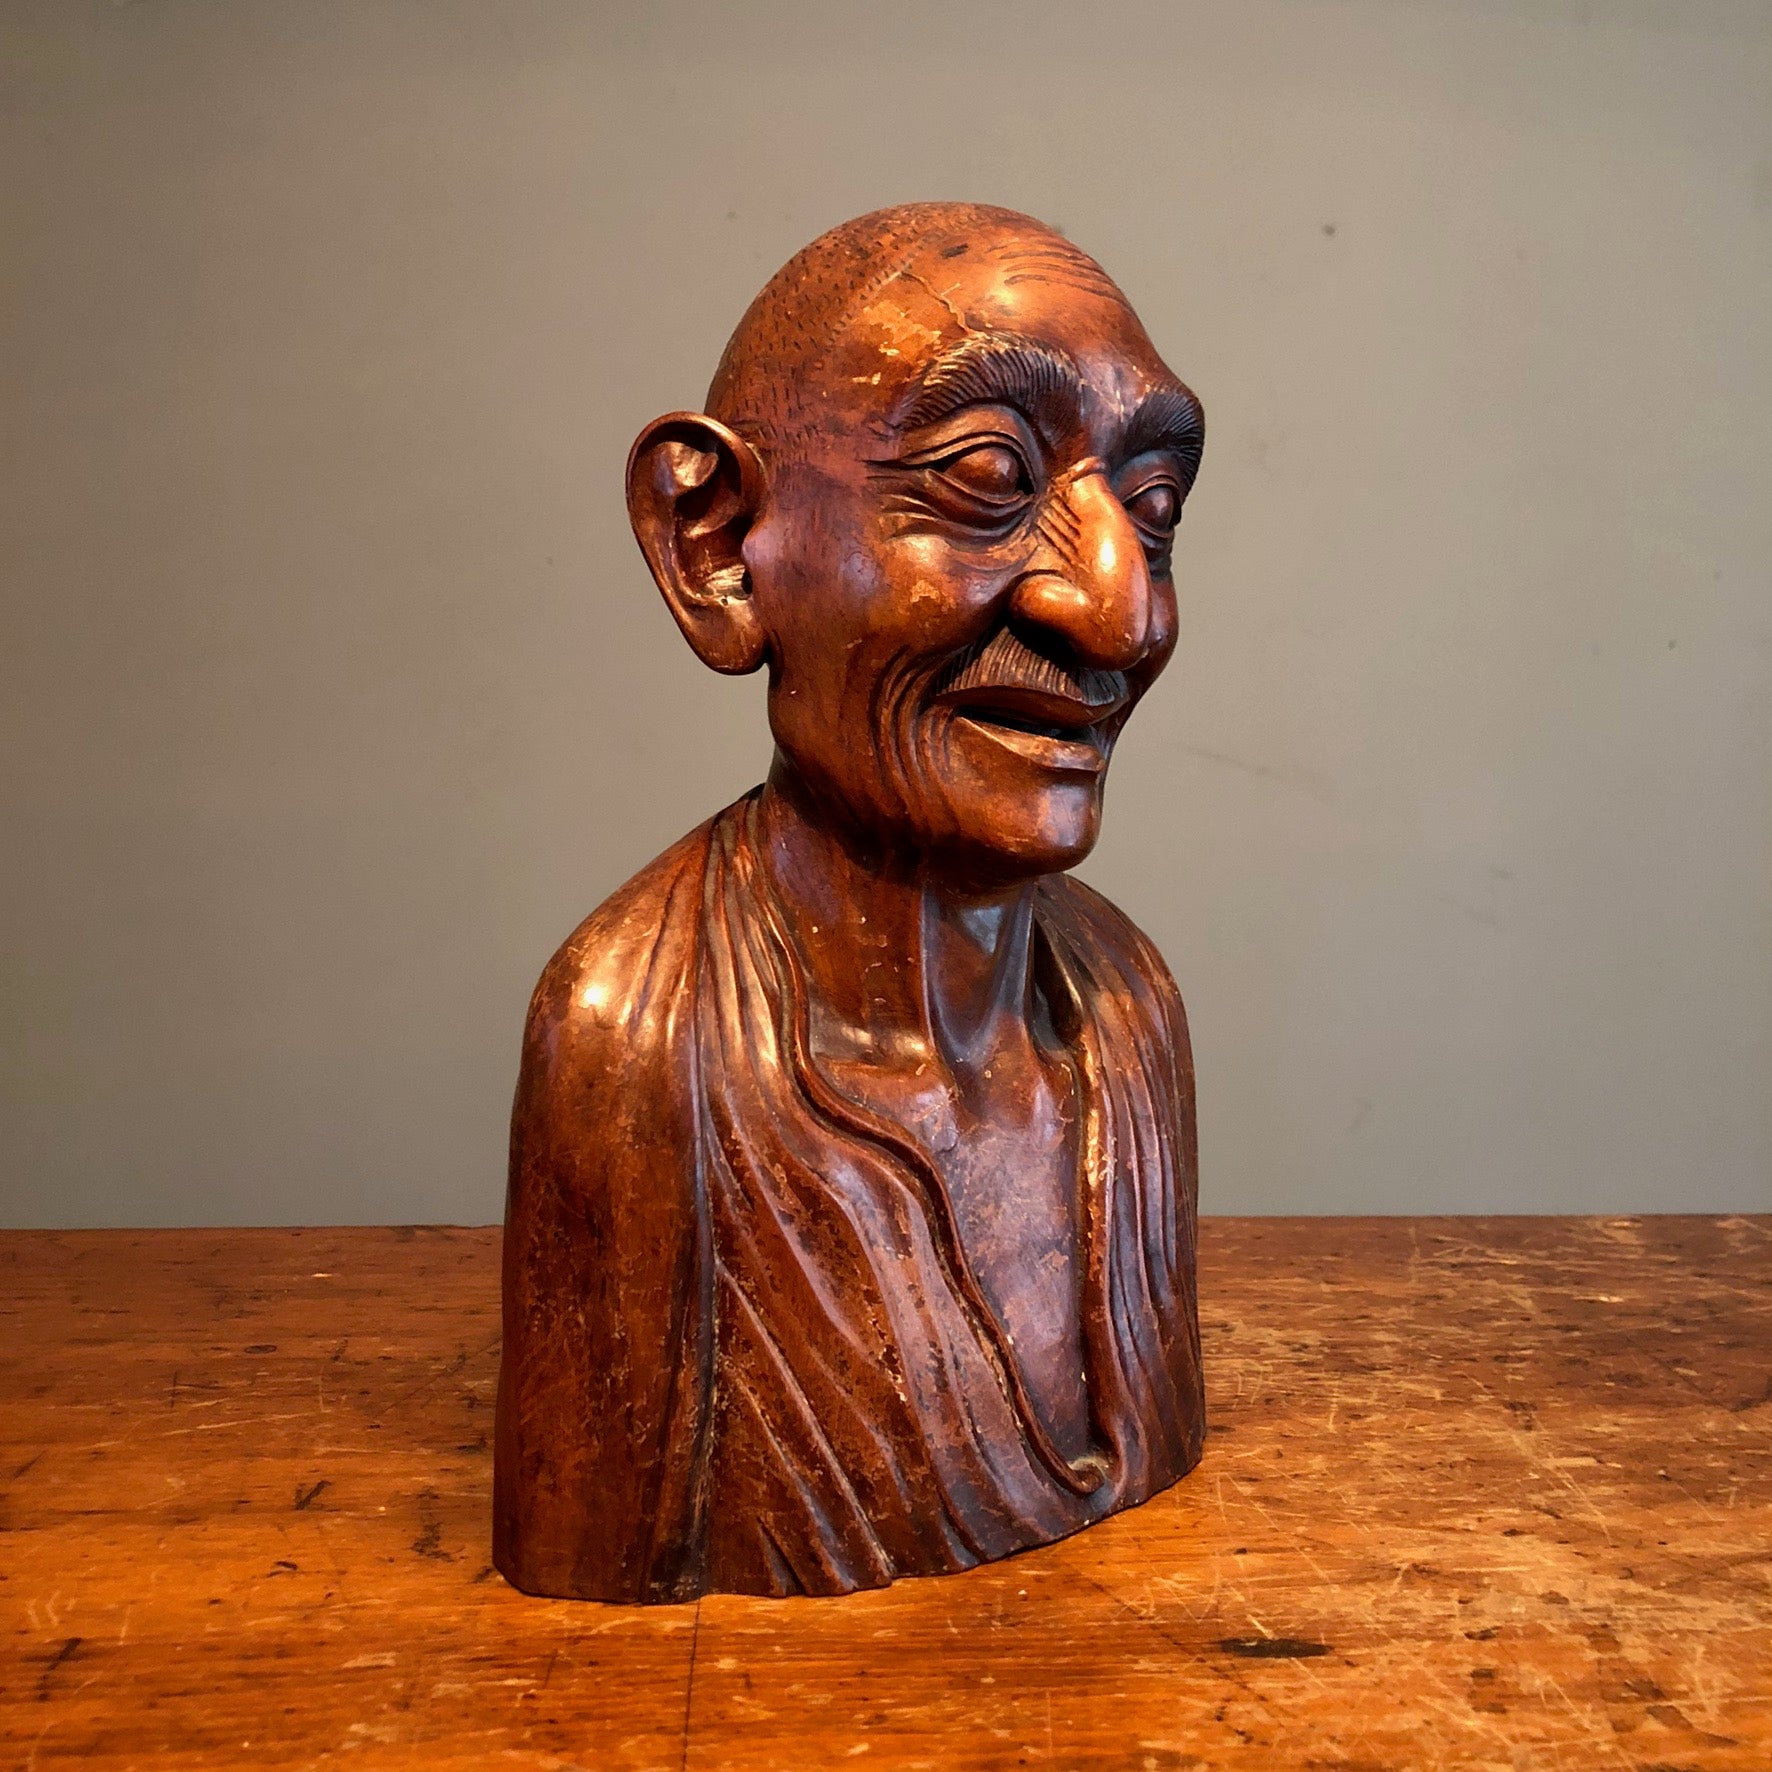 Chinese Wood Bust of Old Man - Turn of the Century - Antique Ornate Sculpture - Rare Asian Carving - Mystery Artist - Creepy